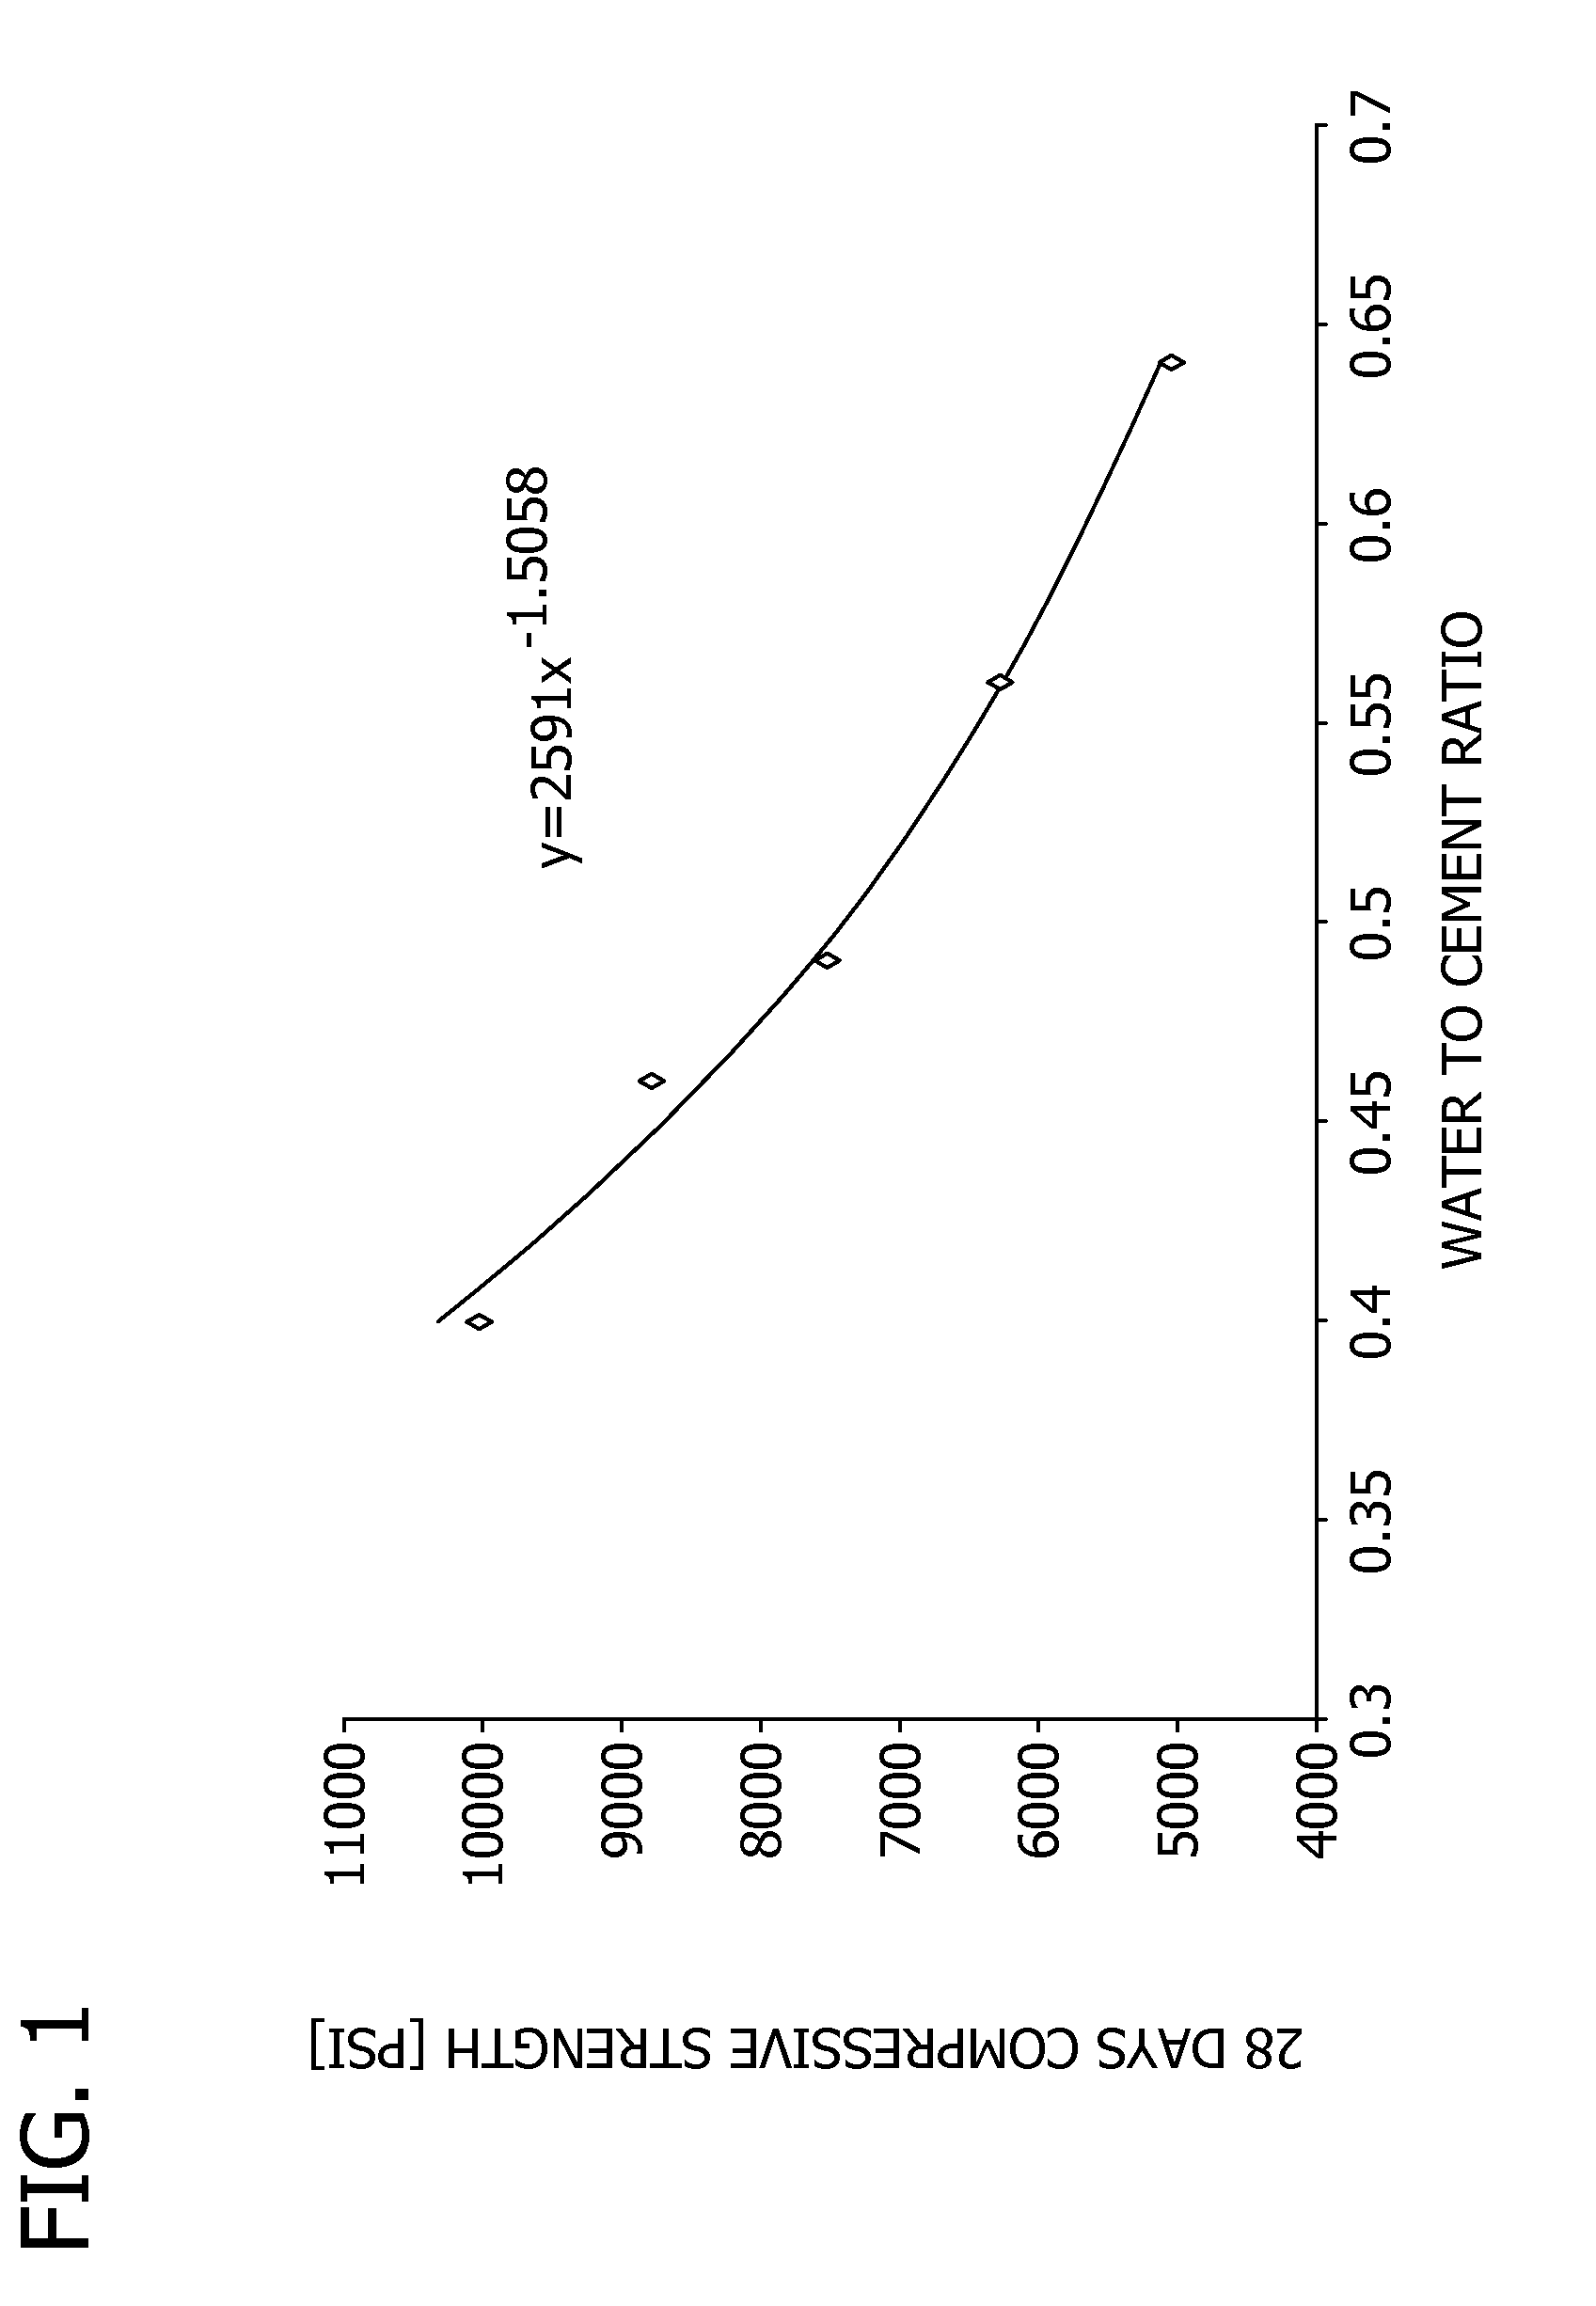 Method of designing a concrete compositions having desired slump with minimal water and plasticizer